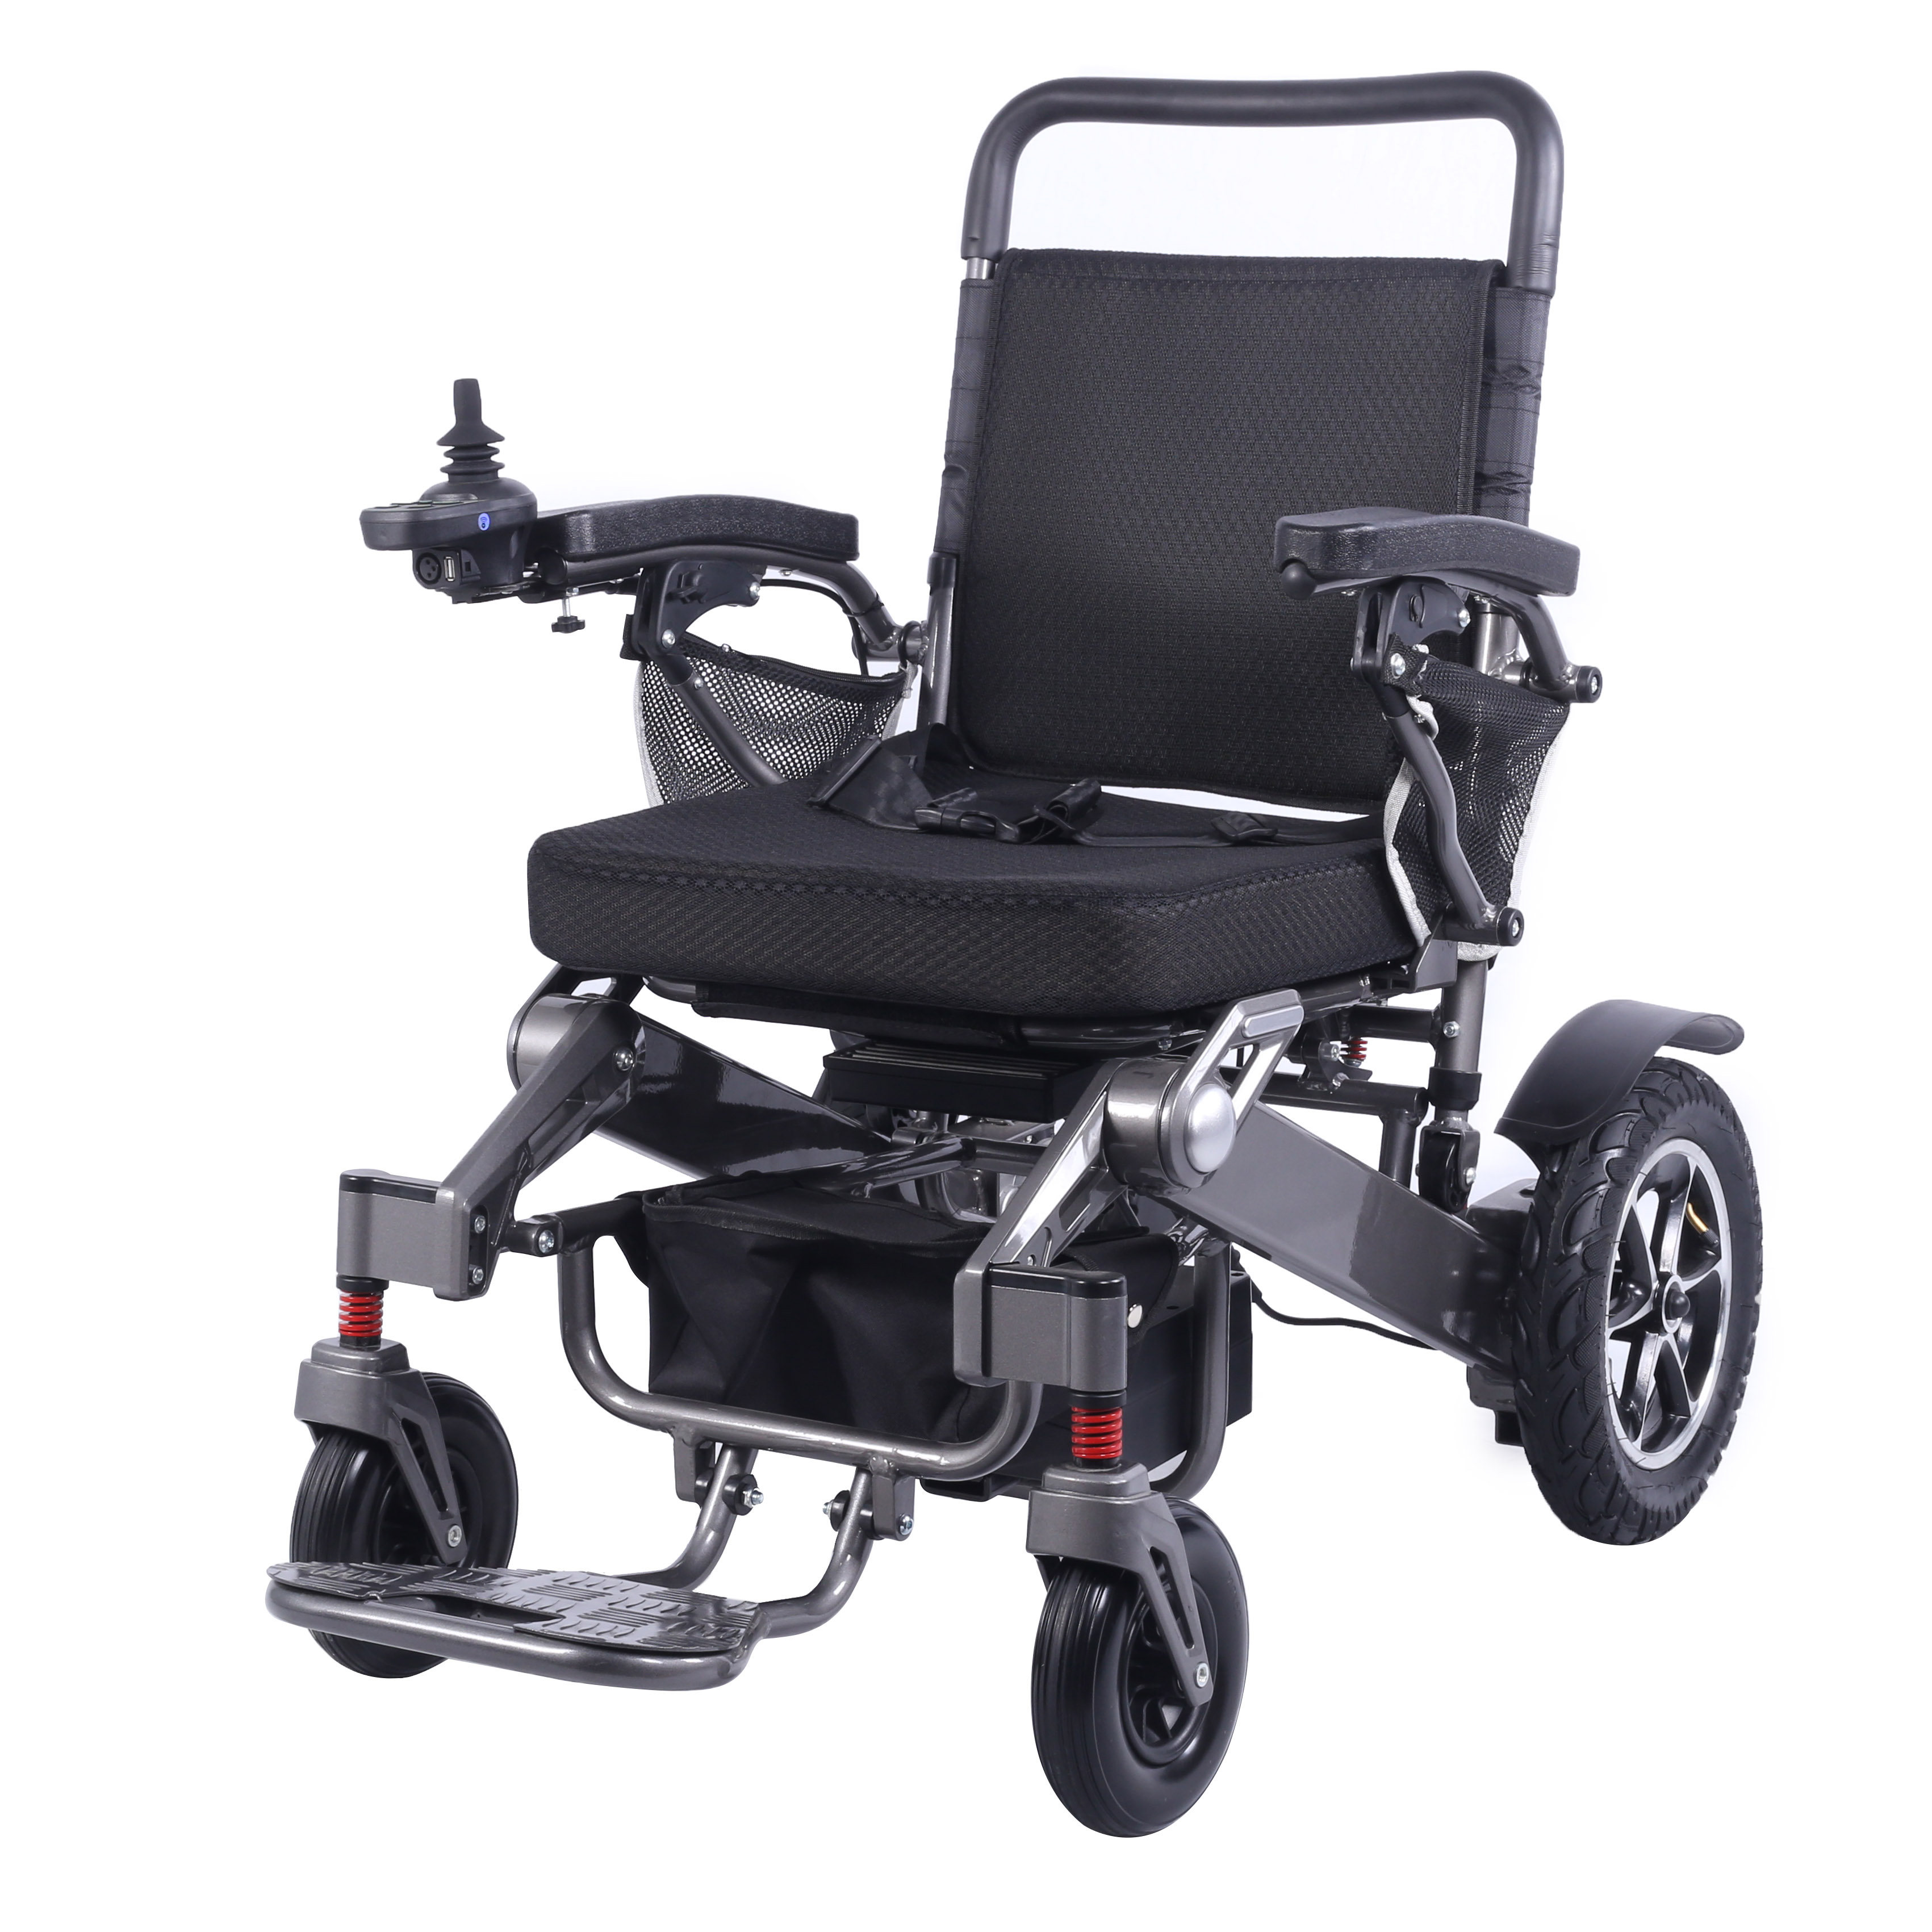 Bc Ea9000 Electric Wheelchair Lightweight Remote Wheelchair Electric Handicapped Electric Mobility Wheelchair1